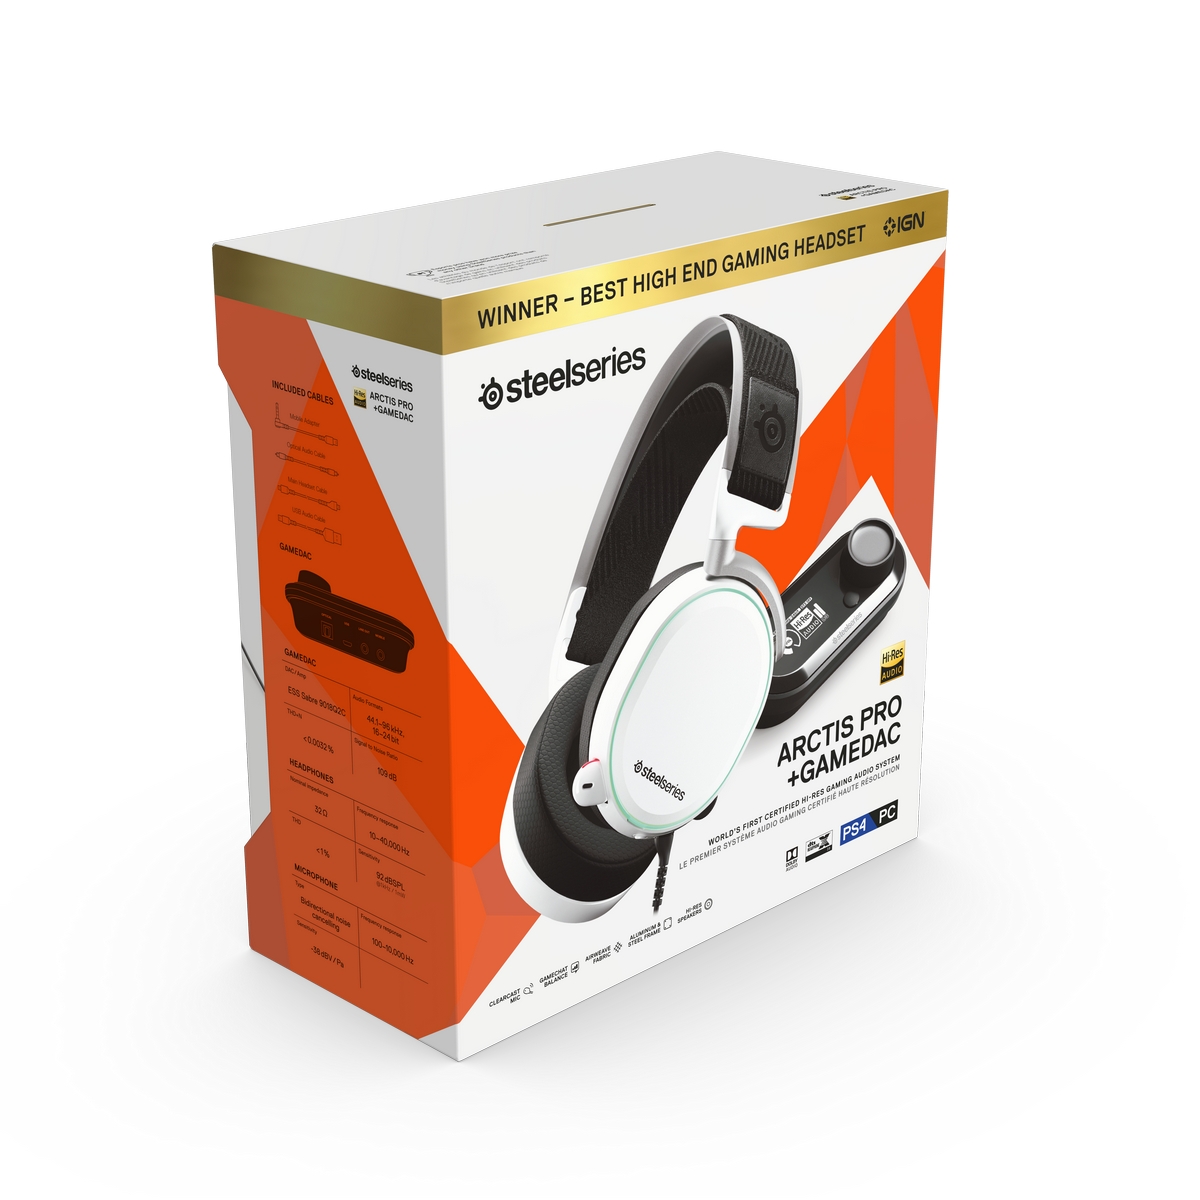 SteelSeries - SteelSeries Arctis Pro USB High Fidelity Gaming Headset and GameDAC Amplifier Bundle White (61454)